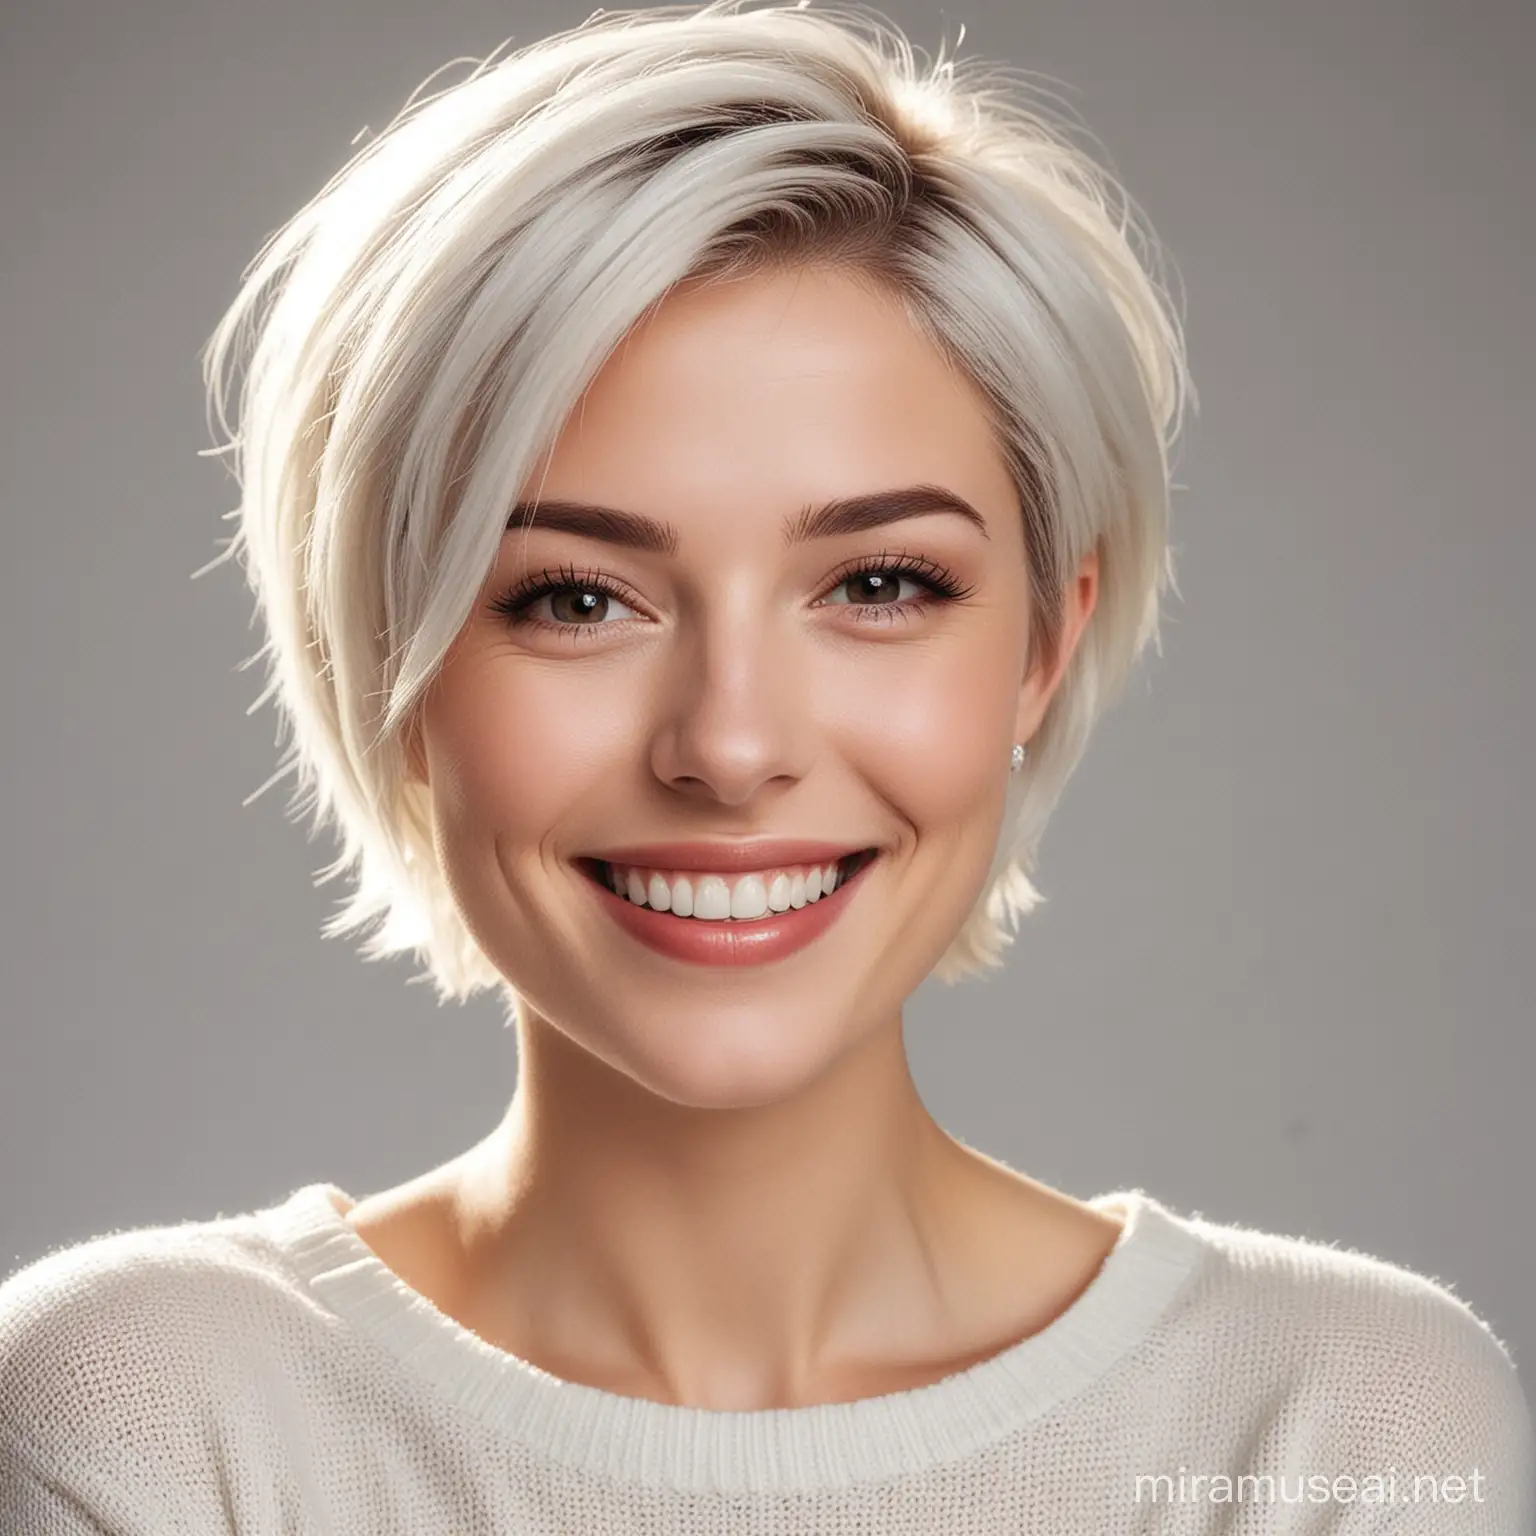 Smiling White Woman with Short Hair Beautiful Portrait of Joy